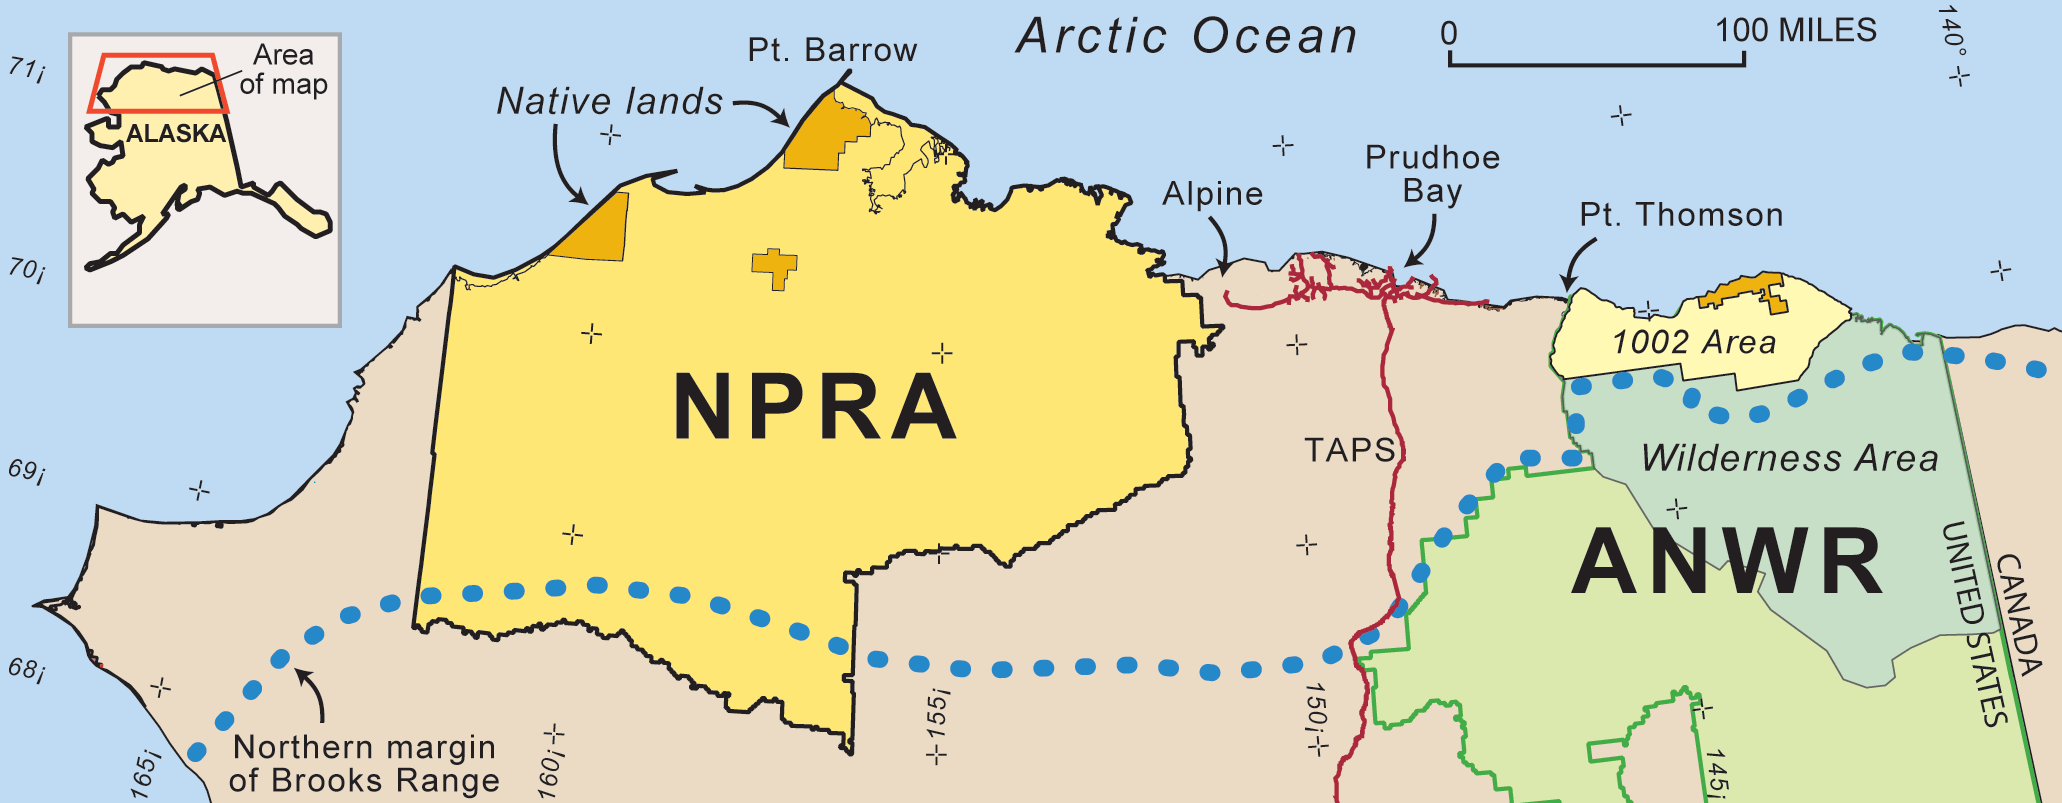 Map showing a detail of the North Slope of Alaska. The boundaries of the National Petroleum Reserve-Alaska in the northwest and the Arctic National Wildlife Refuge in the northeast are shown, along with the 1002 Area in the northern Arctic National Wildlife Refuge. Oil pipelines, including the Trans-Alaska pipeline running south from Prudhoe Bay, are indicated by red lines.